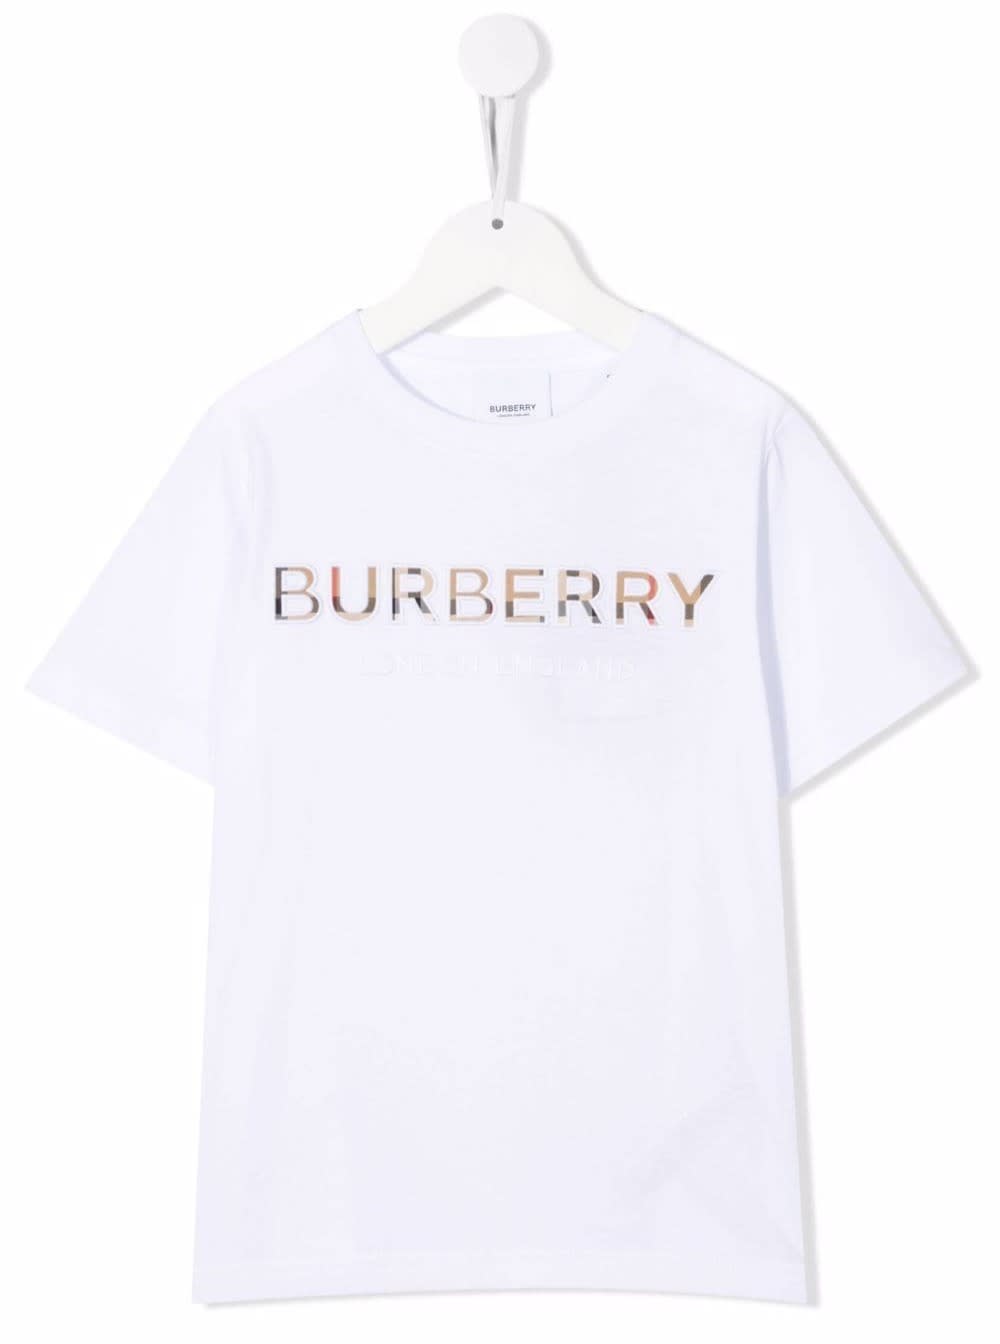 Burberry Kids Girls White Cotton T-shirt With Vintage Check Logo